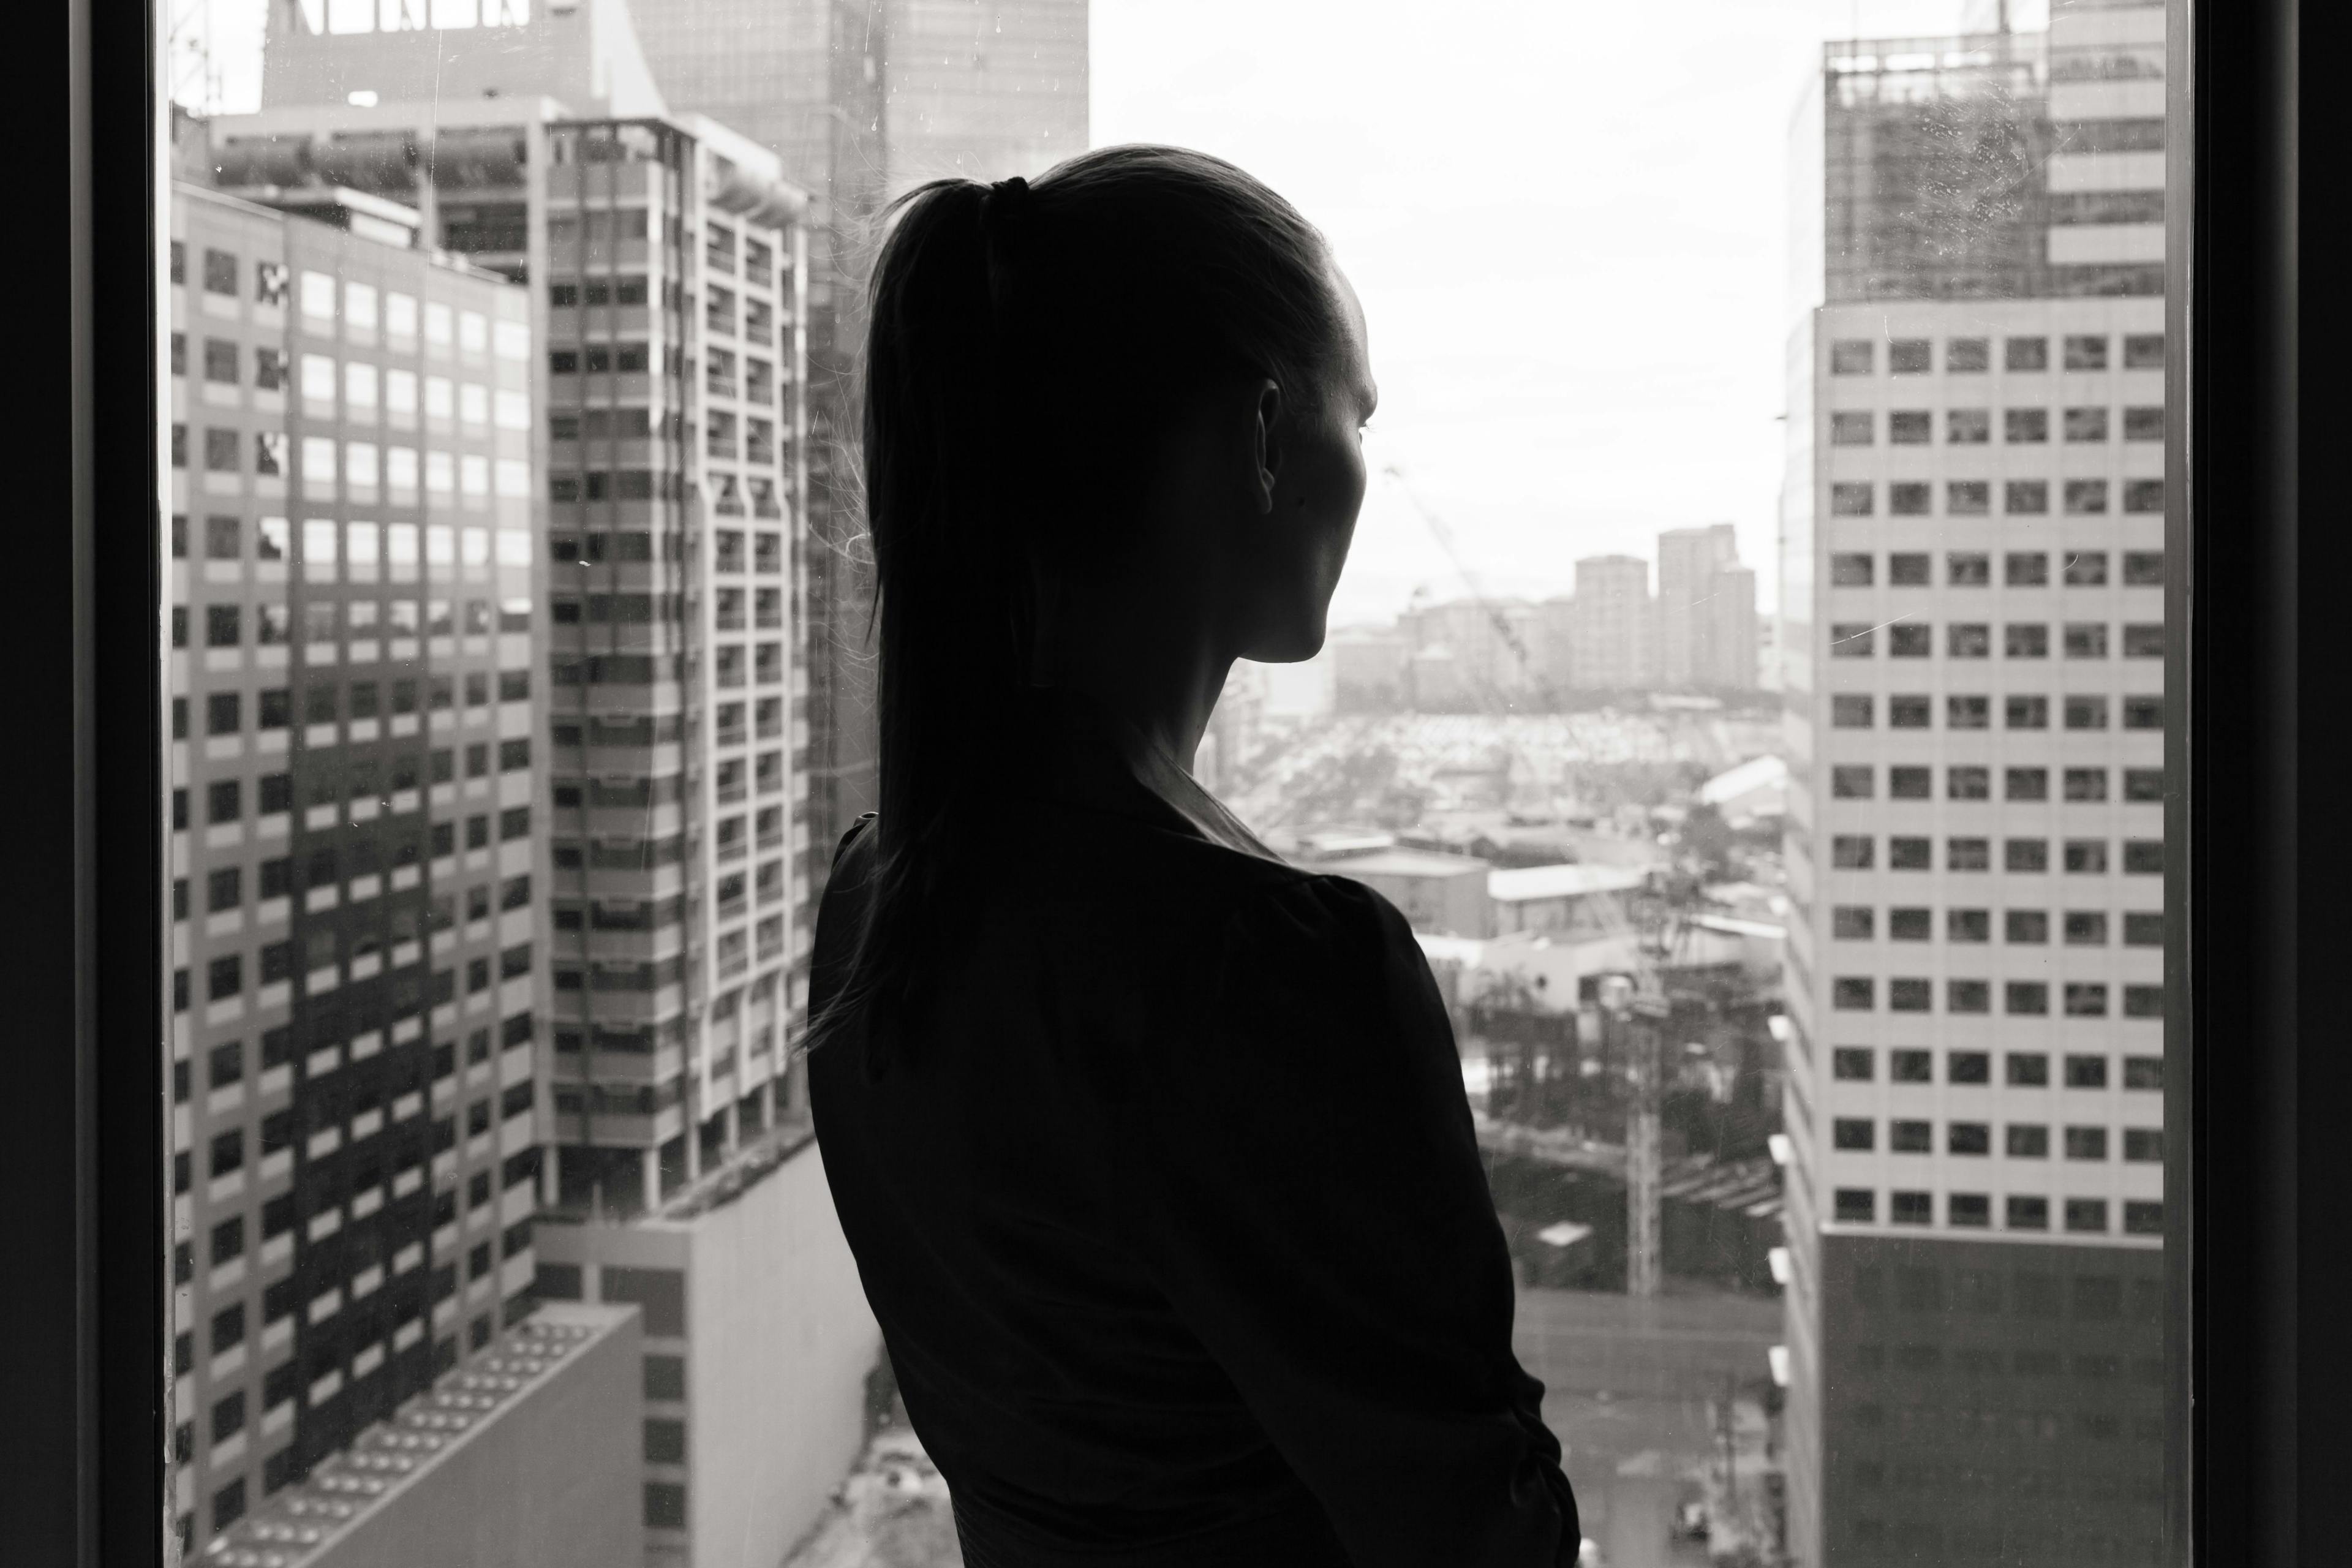 Business woman looks out on city skyline